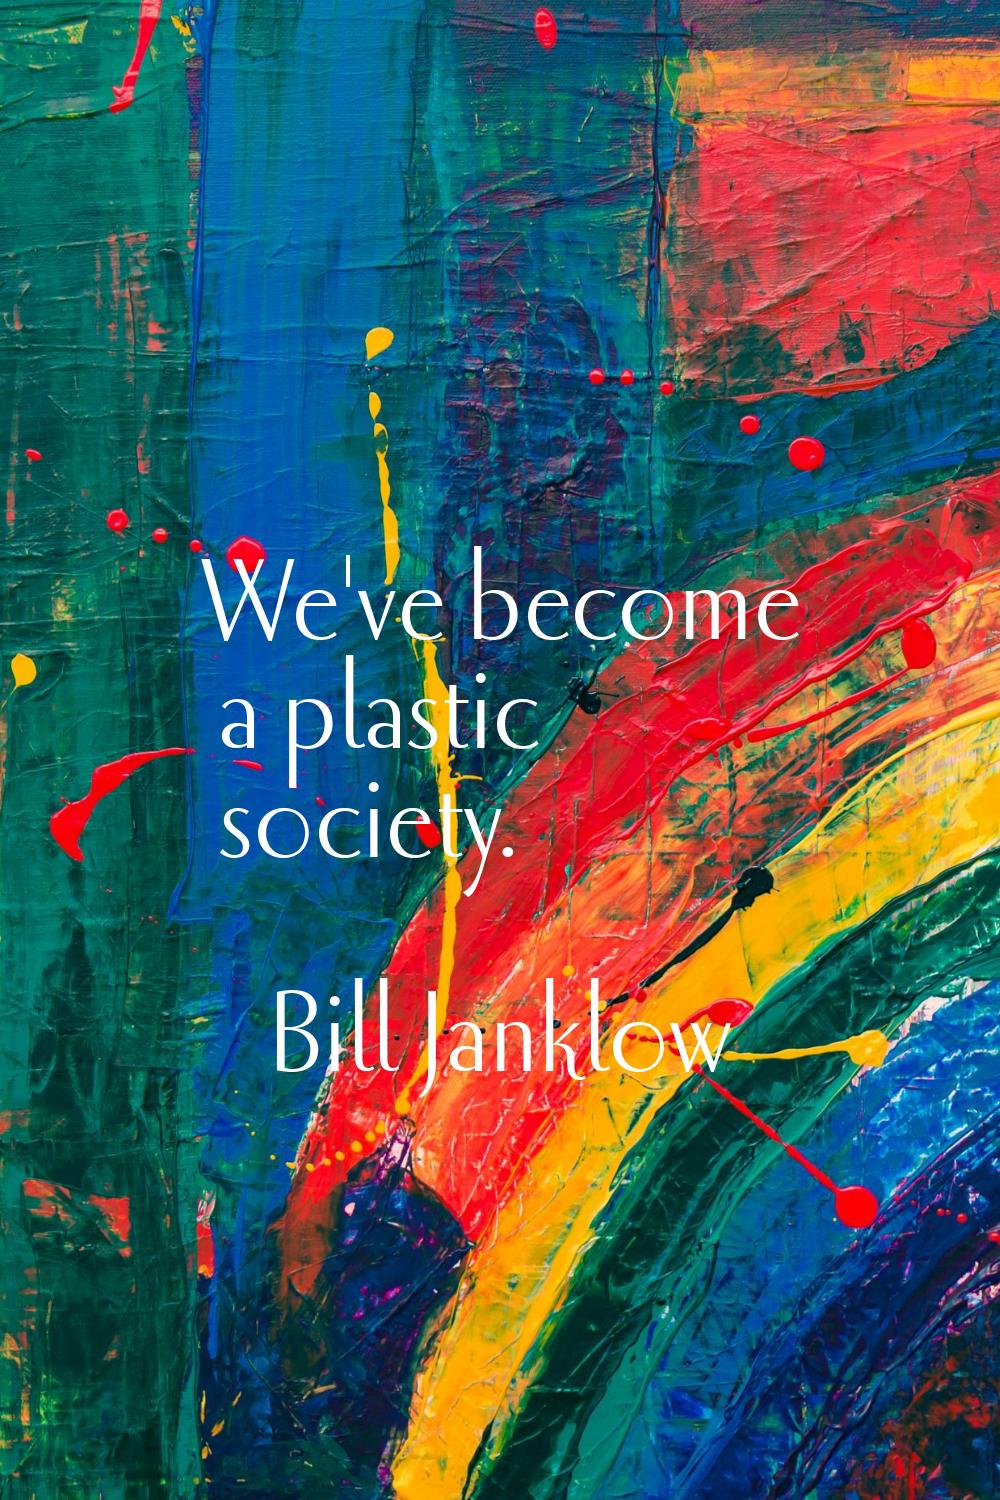 We've become a plastic society.